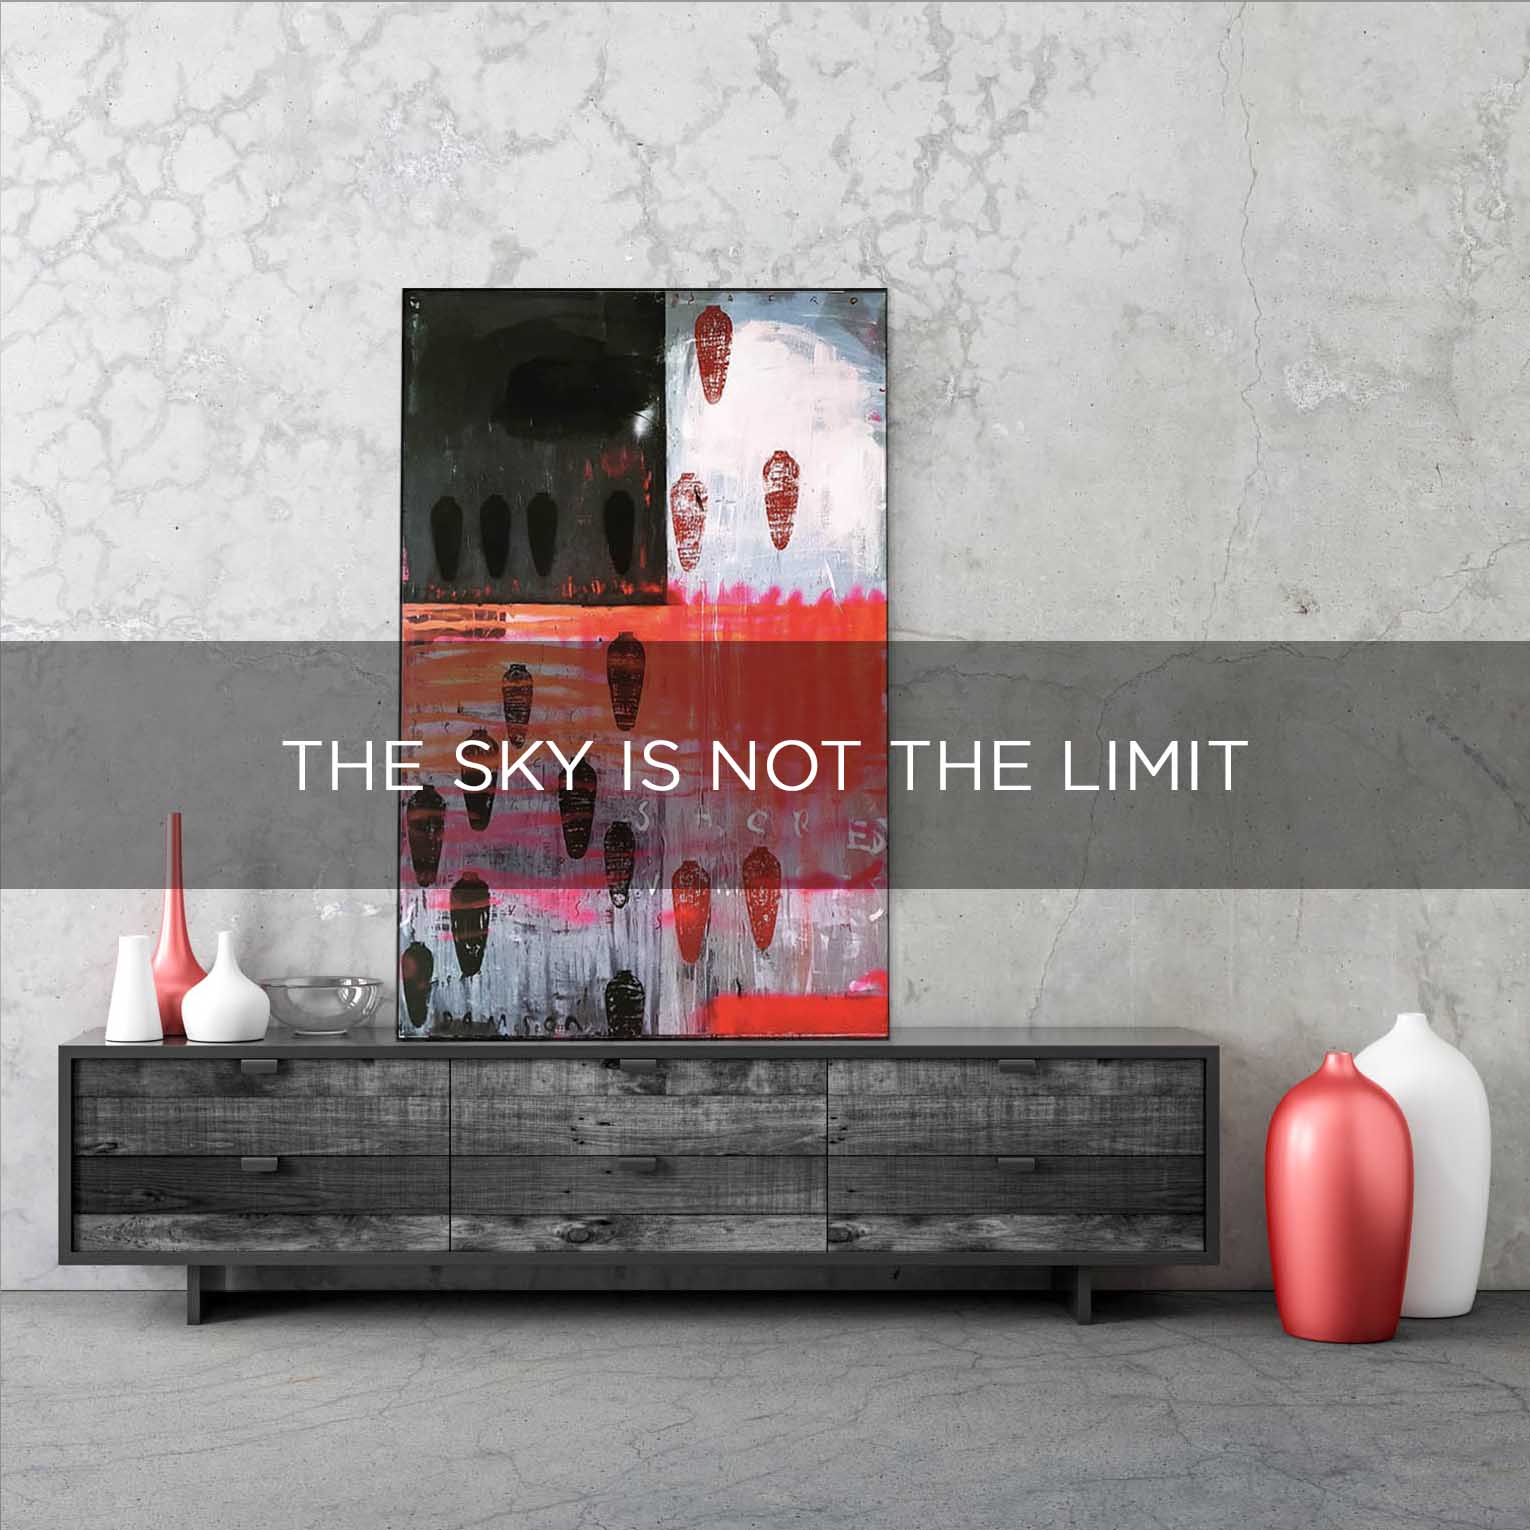 THE SKY IS NOT THE LIMIT